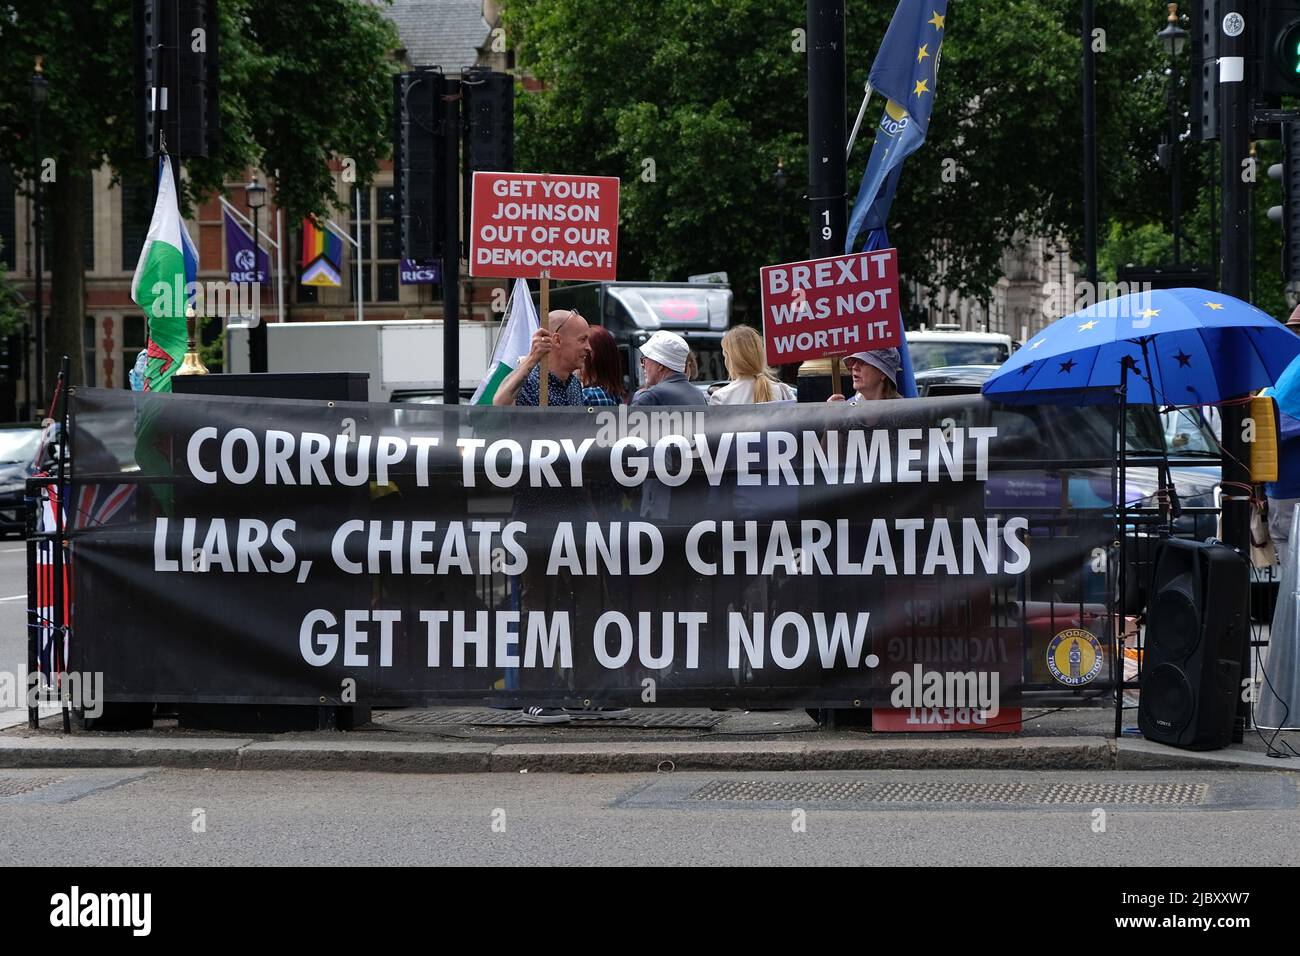 London, UK. Boris Johnson protesters demonstrate close to Parliament during Prime Minister's Question Time, the same week as his no-confidence vote. Stock Photo